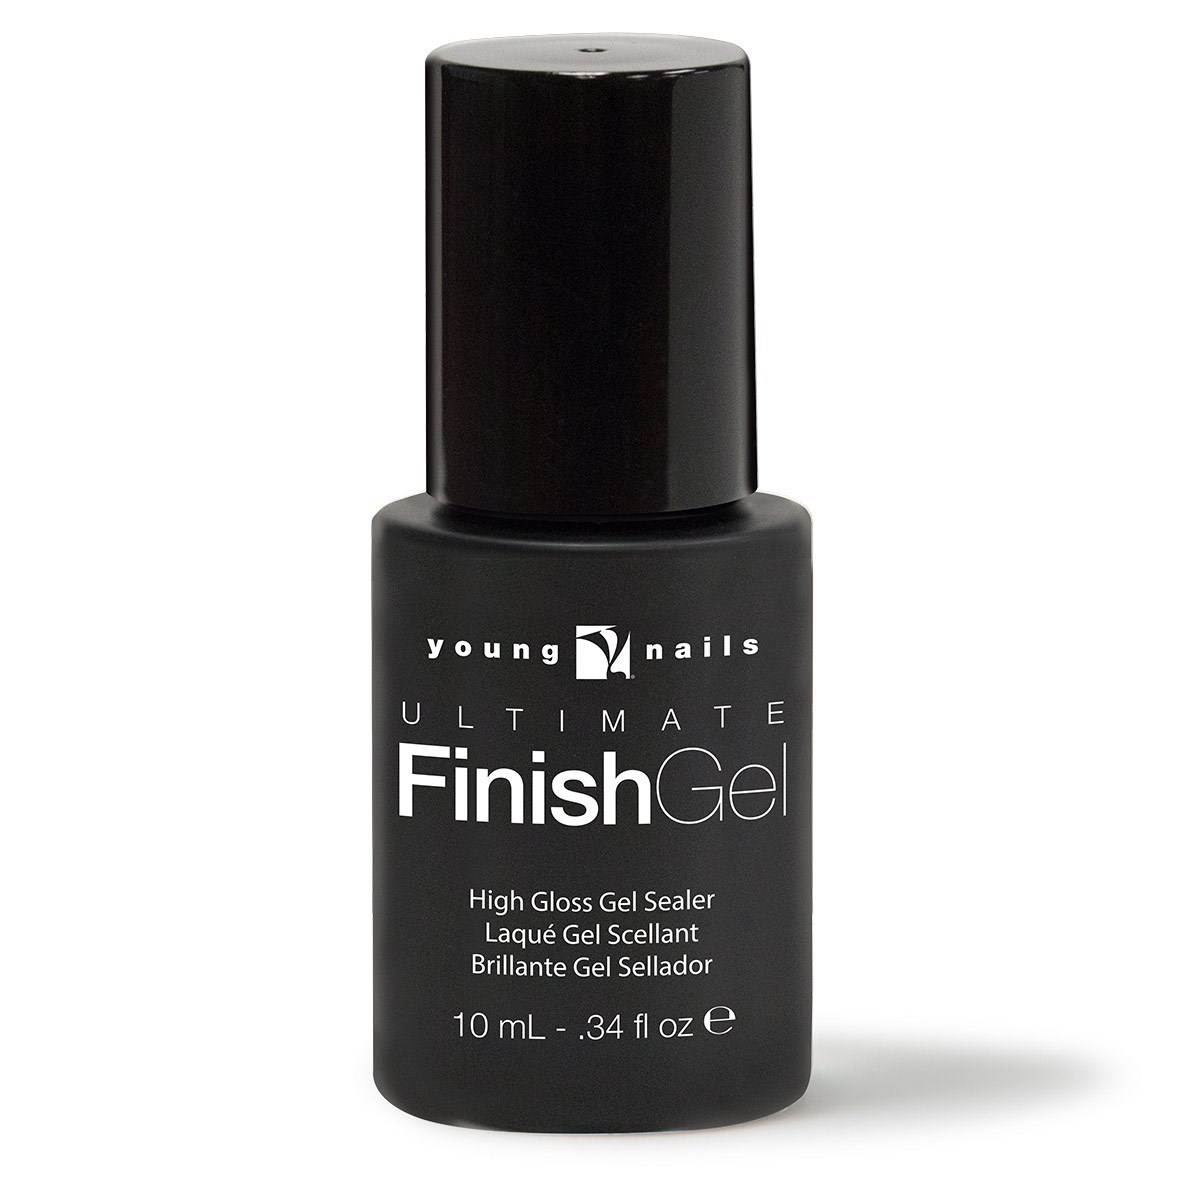 Ultimate Finish Gel - Young Nails UK